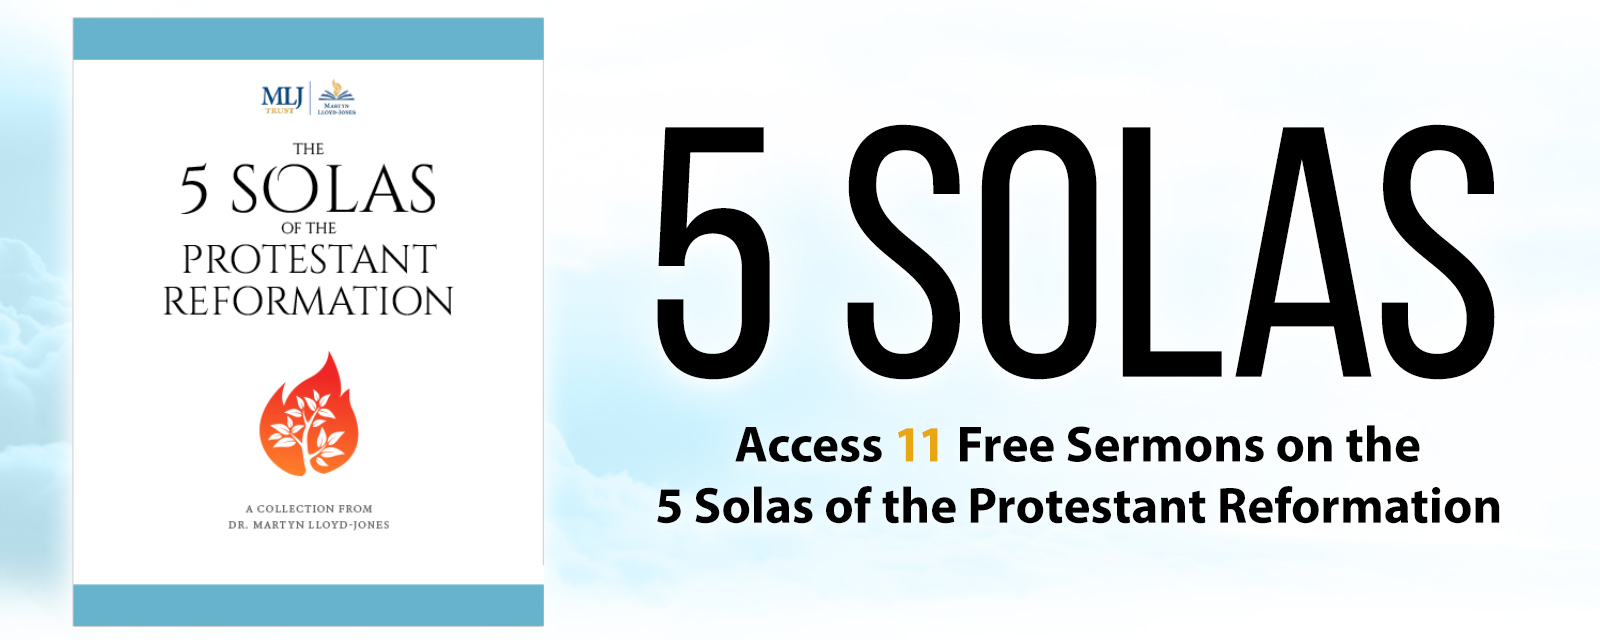 Access 11 Free Sermons on the 5 Solas of the Protestant Reformation + Bonus Study Guide